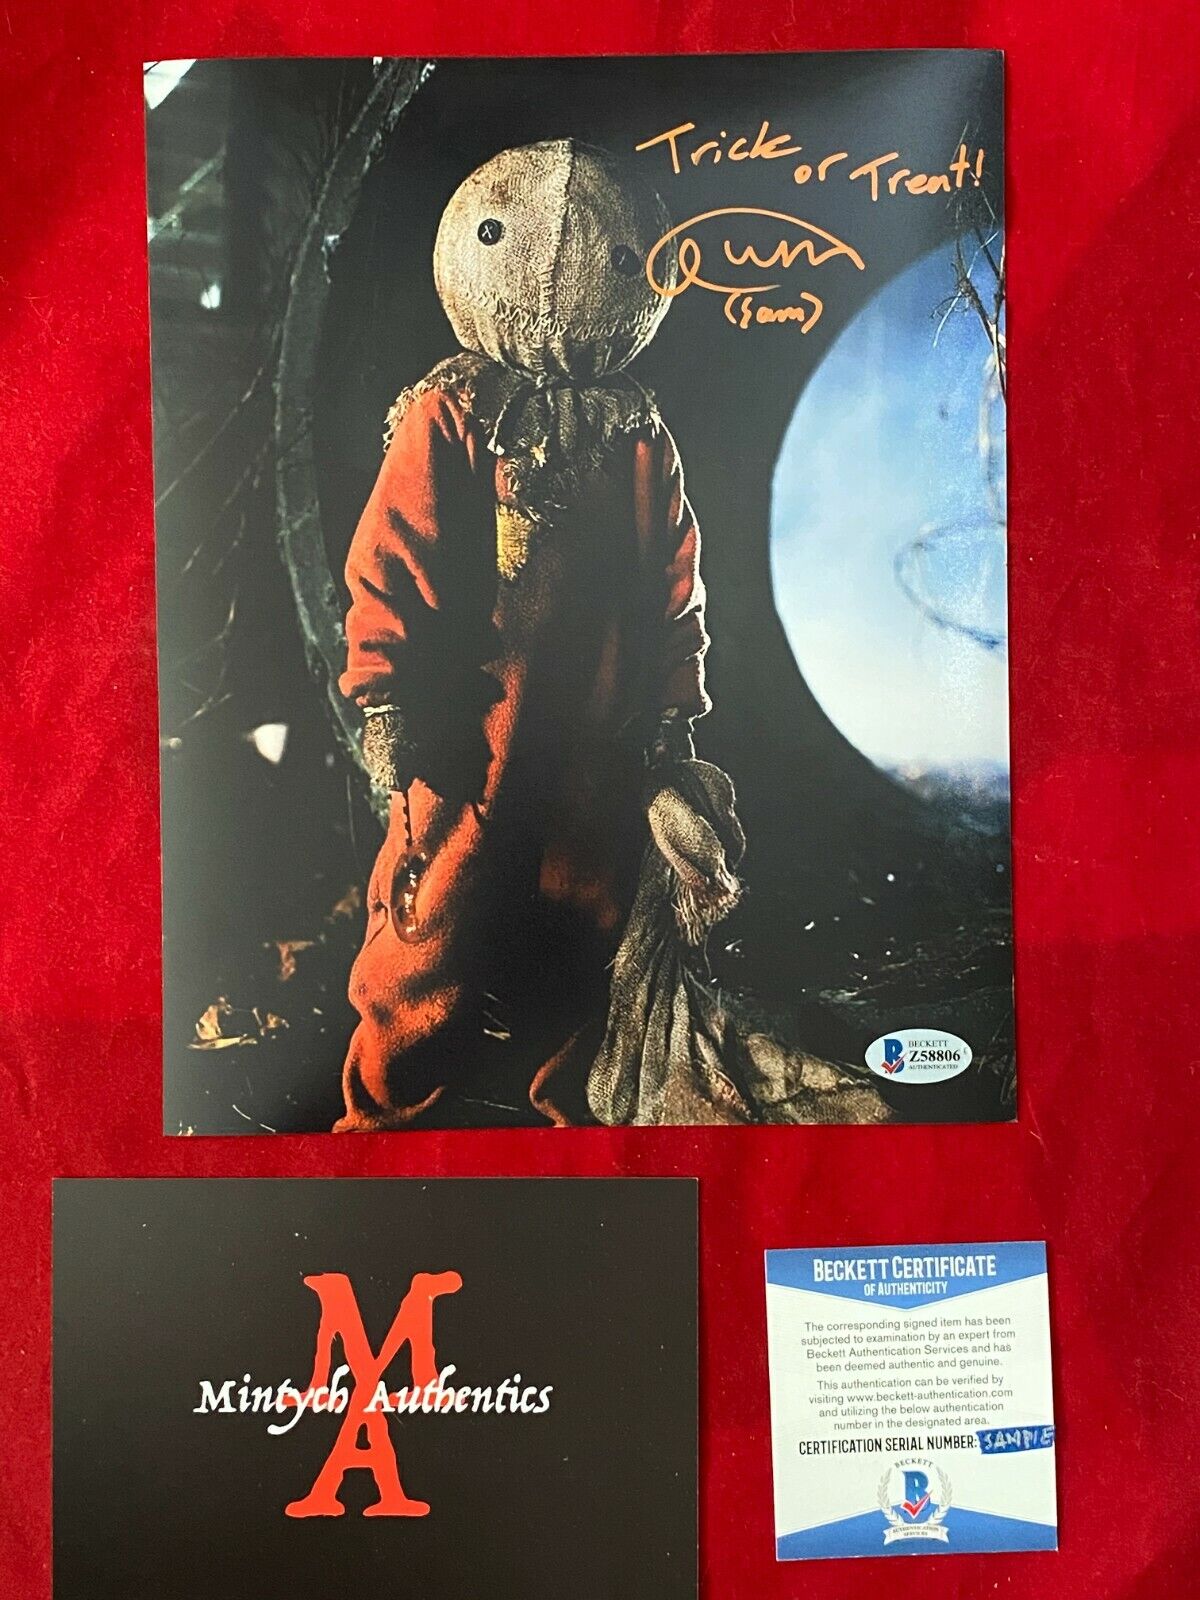 QUINN LORD TRICK 'R TREAT AUTOGRAPHED SIGNED 8x10 Photo Poster painting! BECKETT! HORROR! SAM!